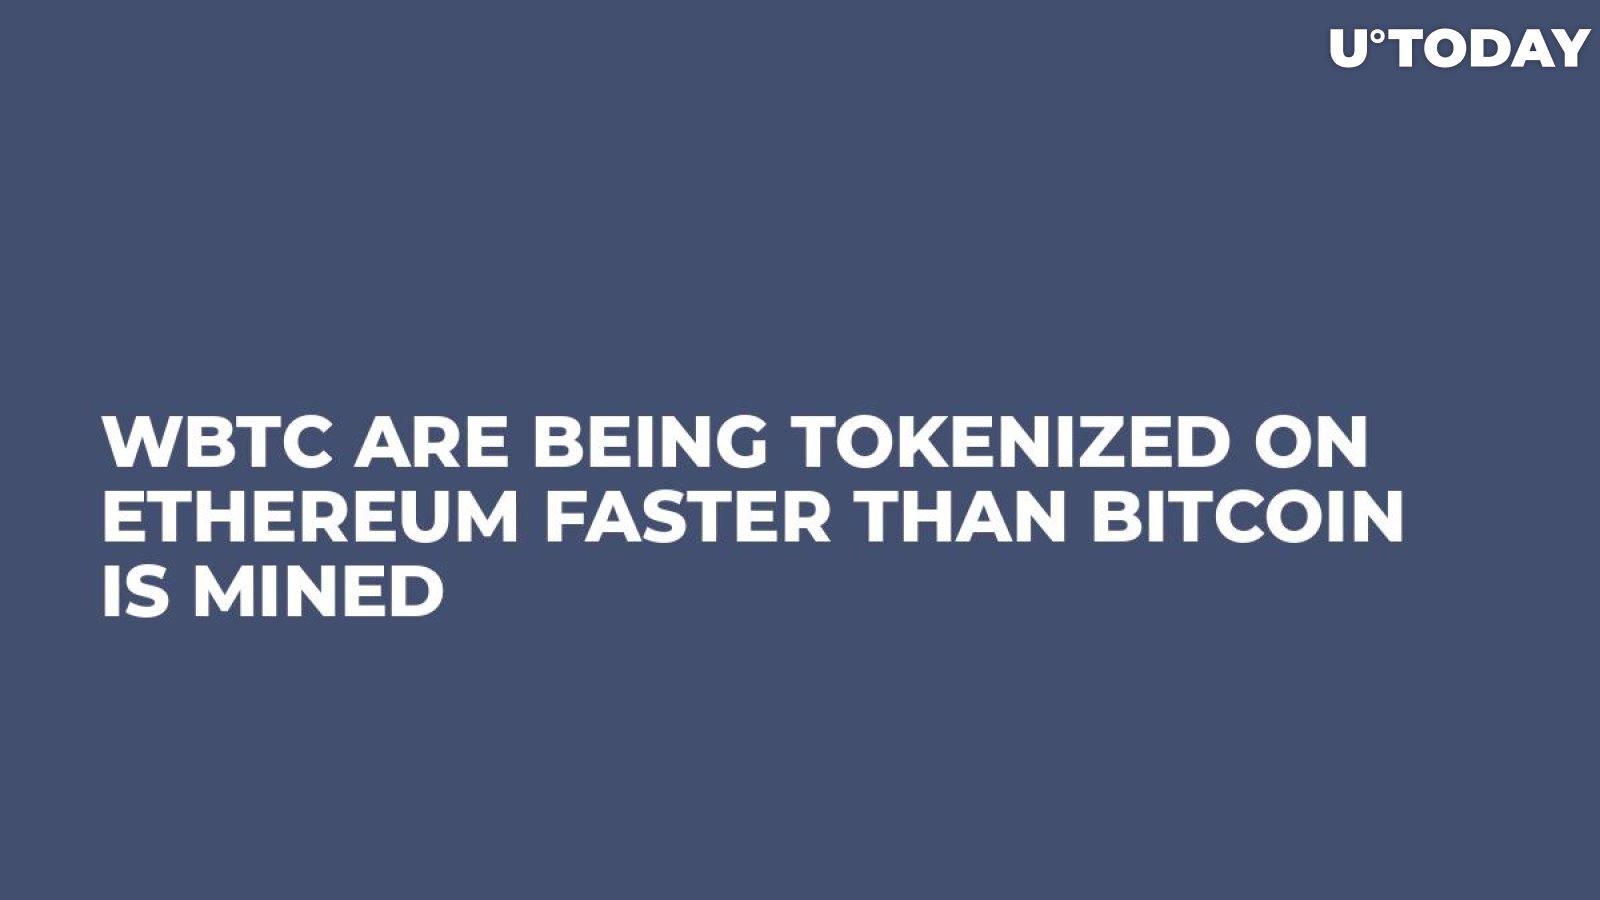 WBTC Are Being Tokenized on Ethereum Faster Than Bitcoin is Mined